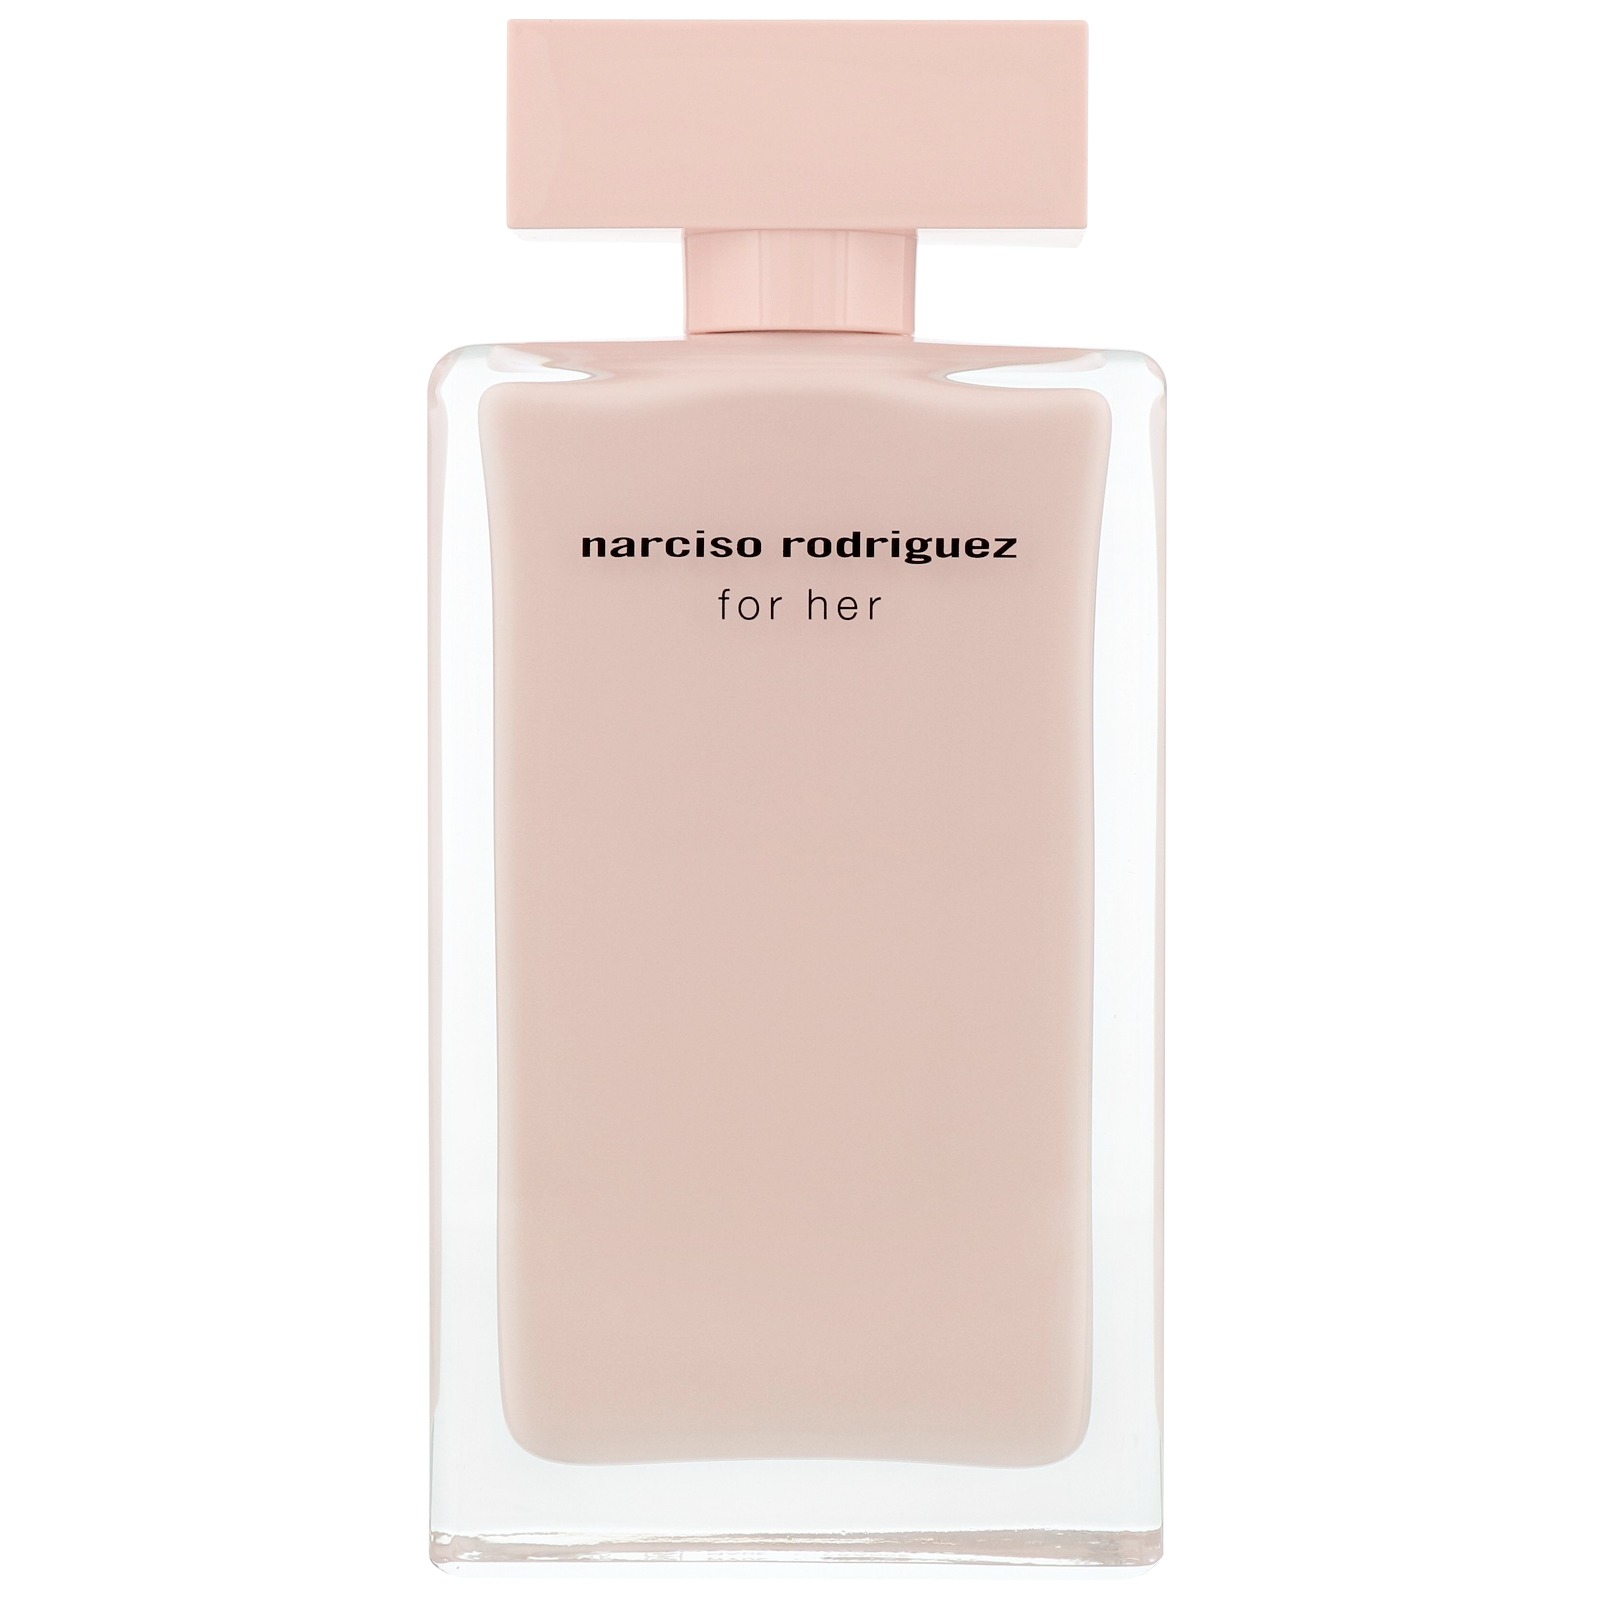 Аромат narciso rodriguez. Narciso Rodriguez for her EDP 100ml. Narciso Rodriguez for her Eau de Parfum. Narciso Rodriguez for her Eau de Parfum парфюмерная вода 100 мл. Narciso Rodriguez for her (женские) 100ml туалетная вода.